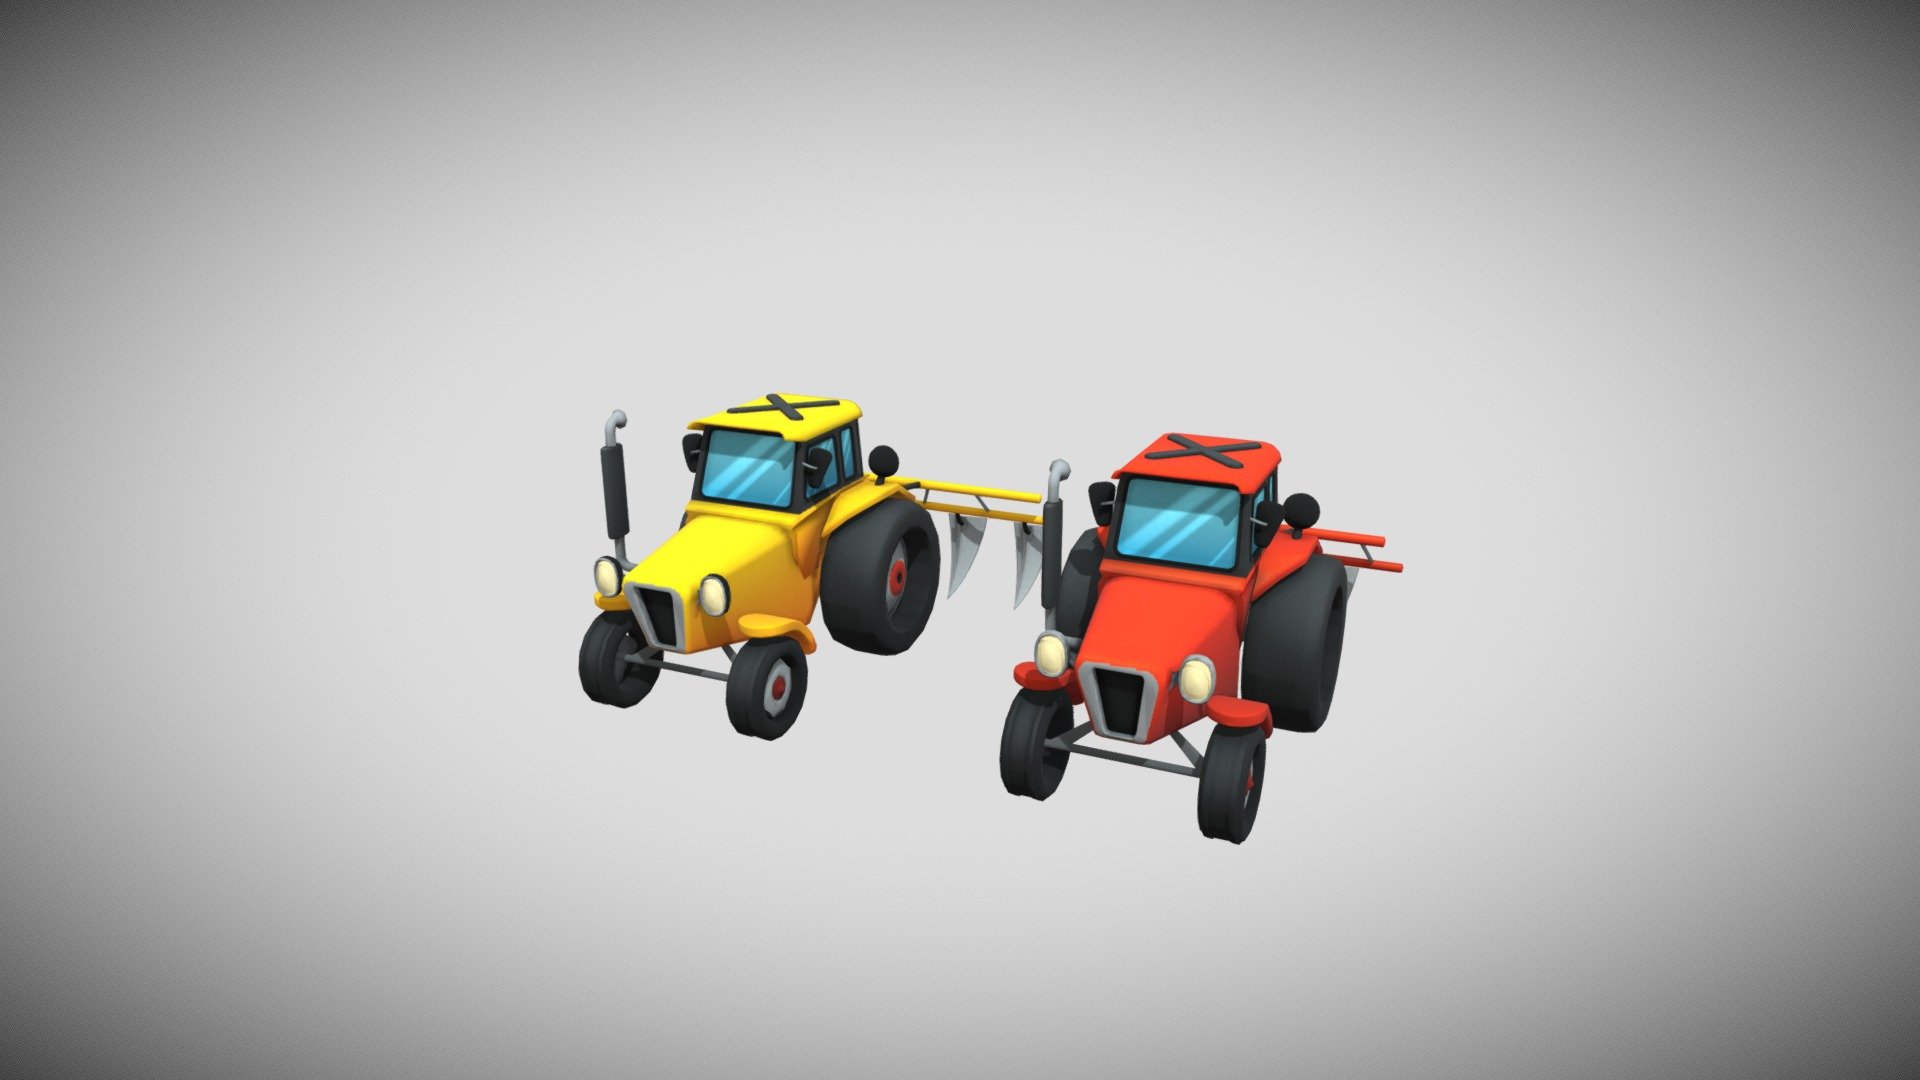 Collection includes 2 variations of lowpoly stylized Tractor models with textures, colours &amp; materials. Contains all basic farm equipments.

2 - Tractor variations.

‘All models are strictly exteriors only’ All models contain optmised UV mapping with topology, textures and materials for direct use .

Formats:

fbx - Tractors_Stylized Low-Poly - Download Free 3D model by ZyneLabs 3d model